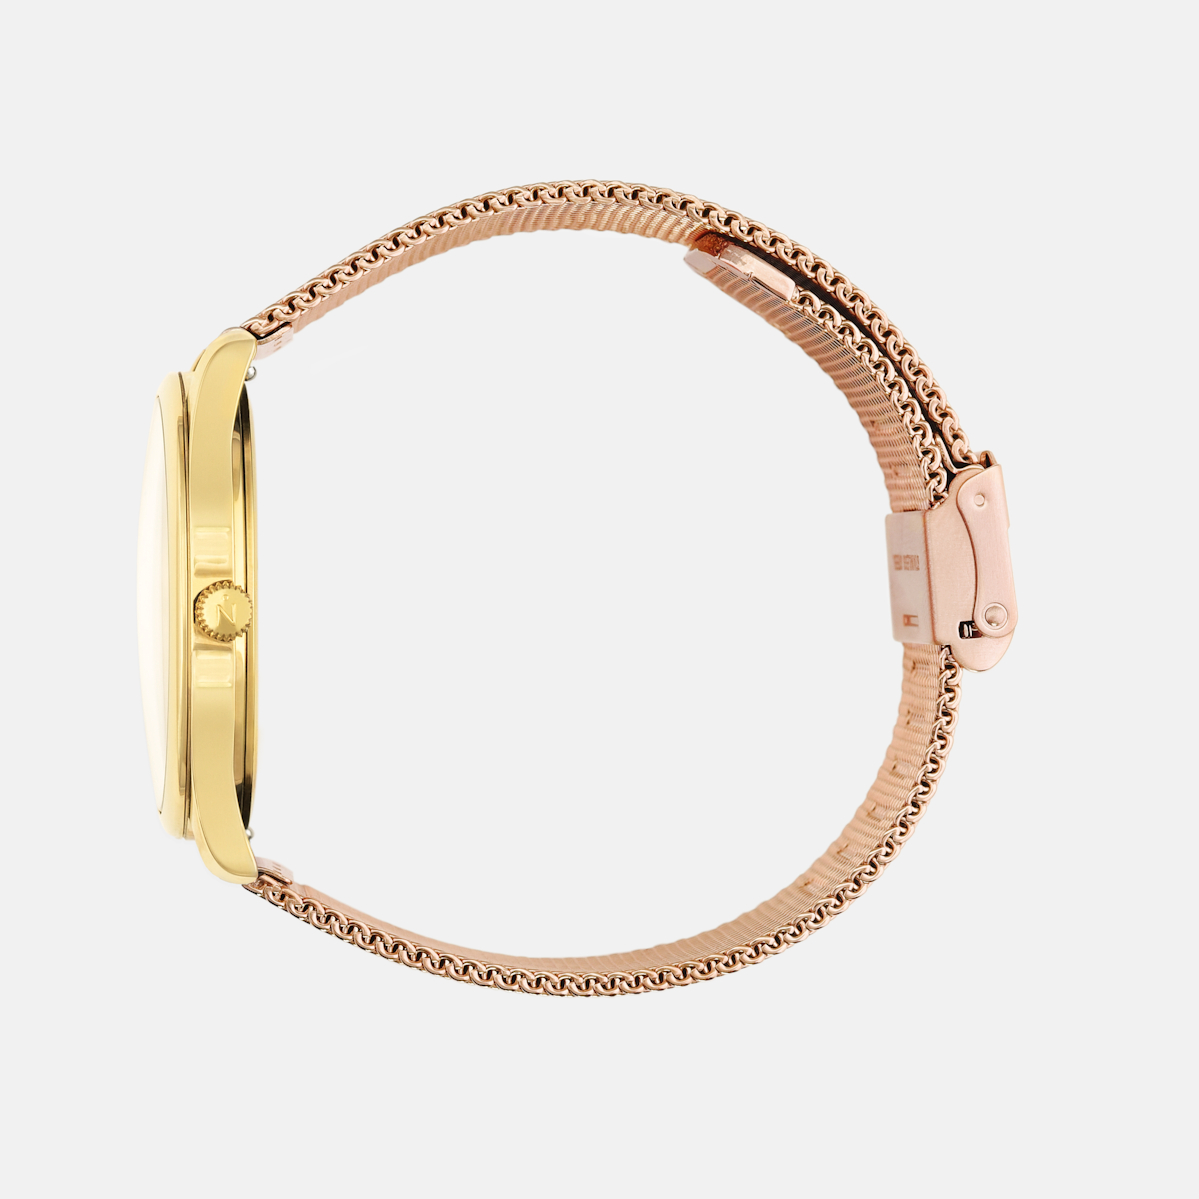 Lune 8 - Gold and White - Rose Gold Mesh